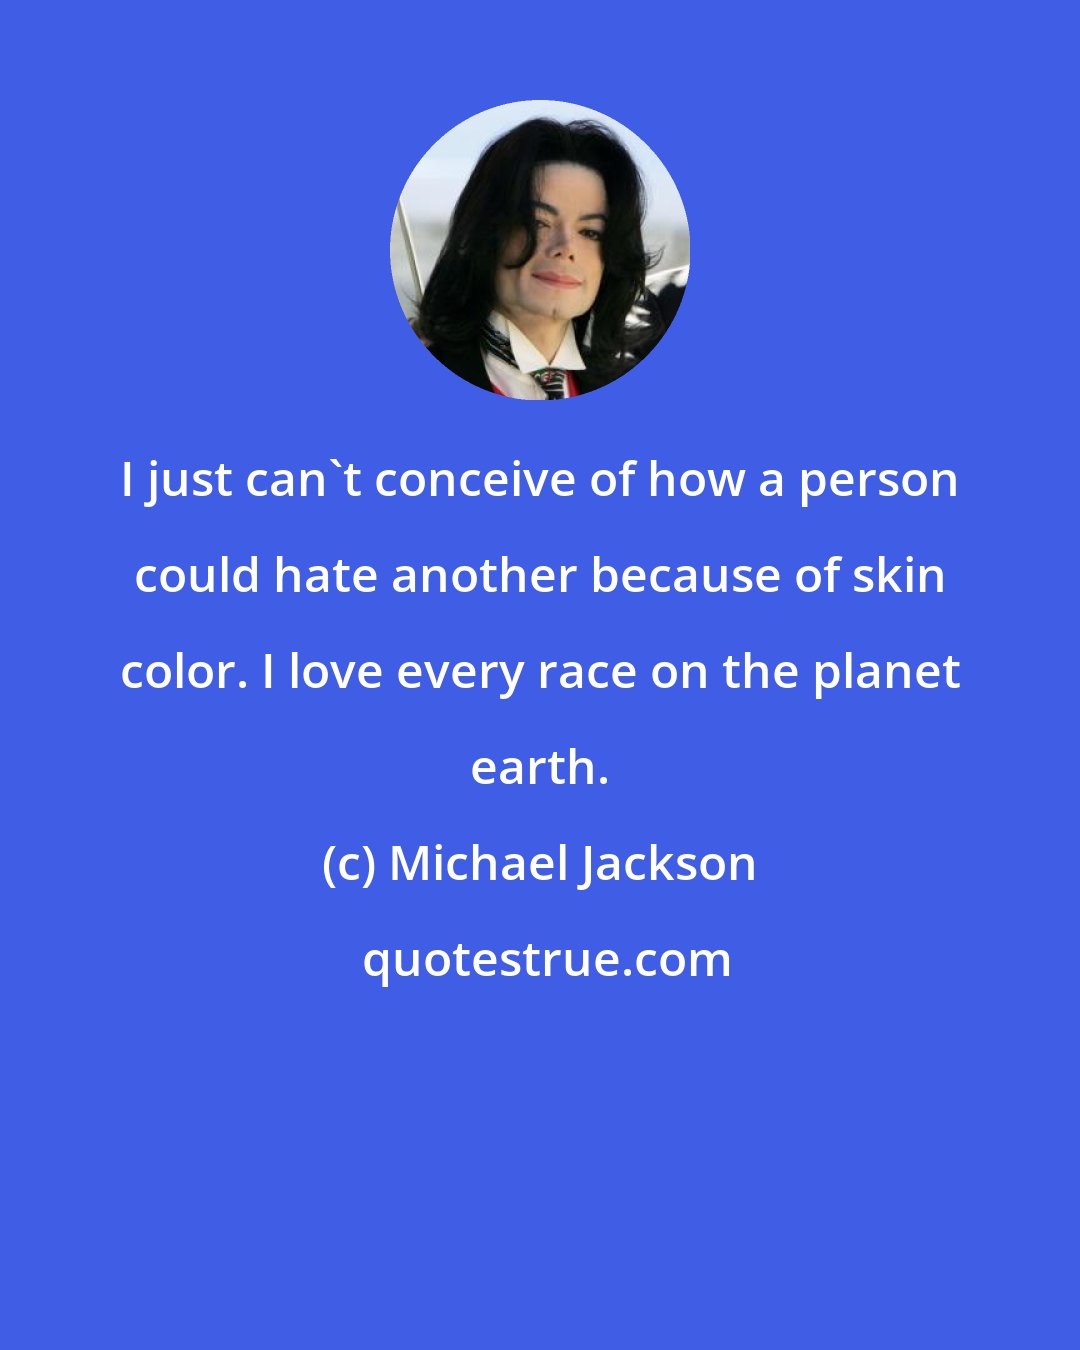 Michael Jackson: I just can't conceive of how a person could hate another because of skin color. I love every race on the planet earth.